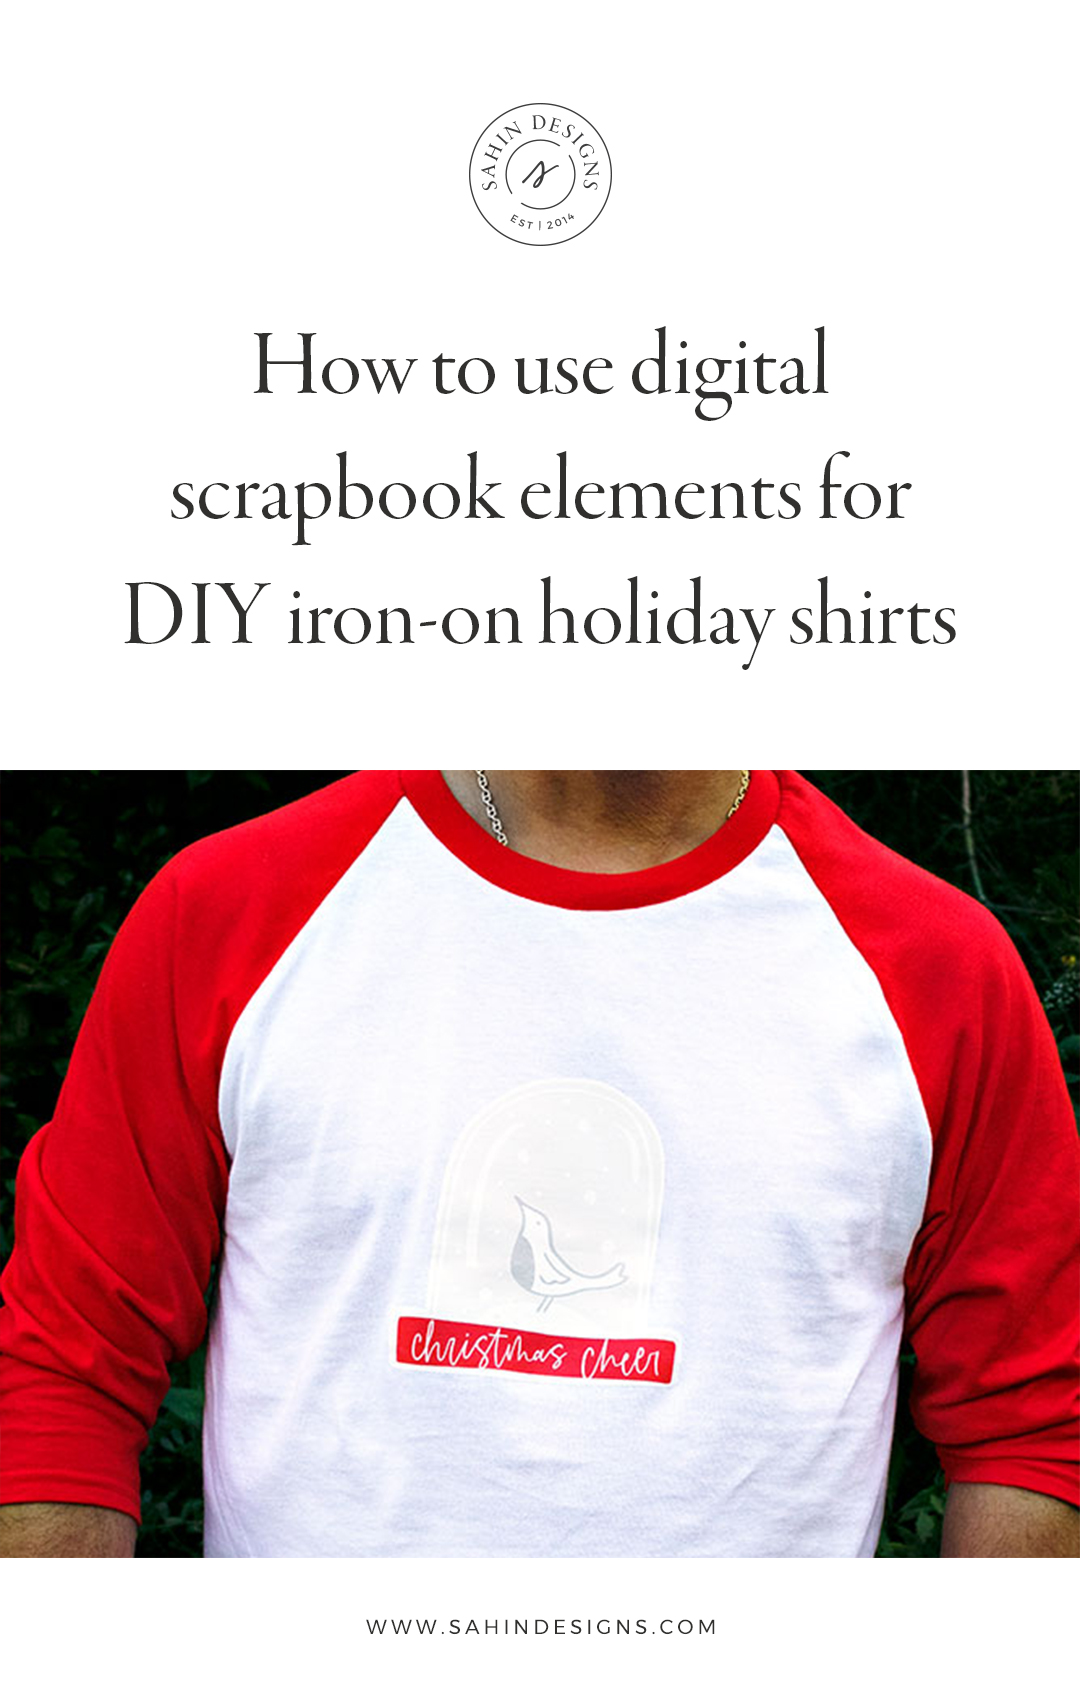 How to use digital scrapbook elements for DIY iron-on holiday shirts - Sahin Designs